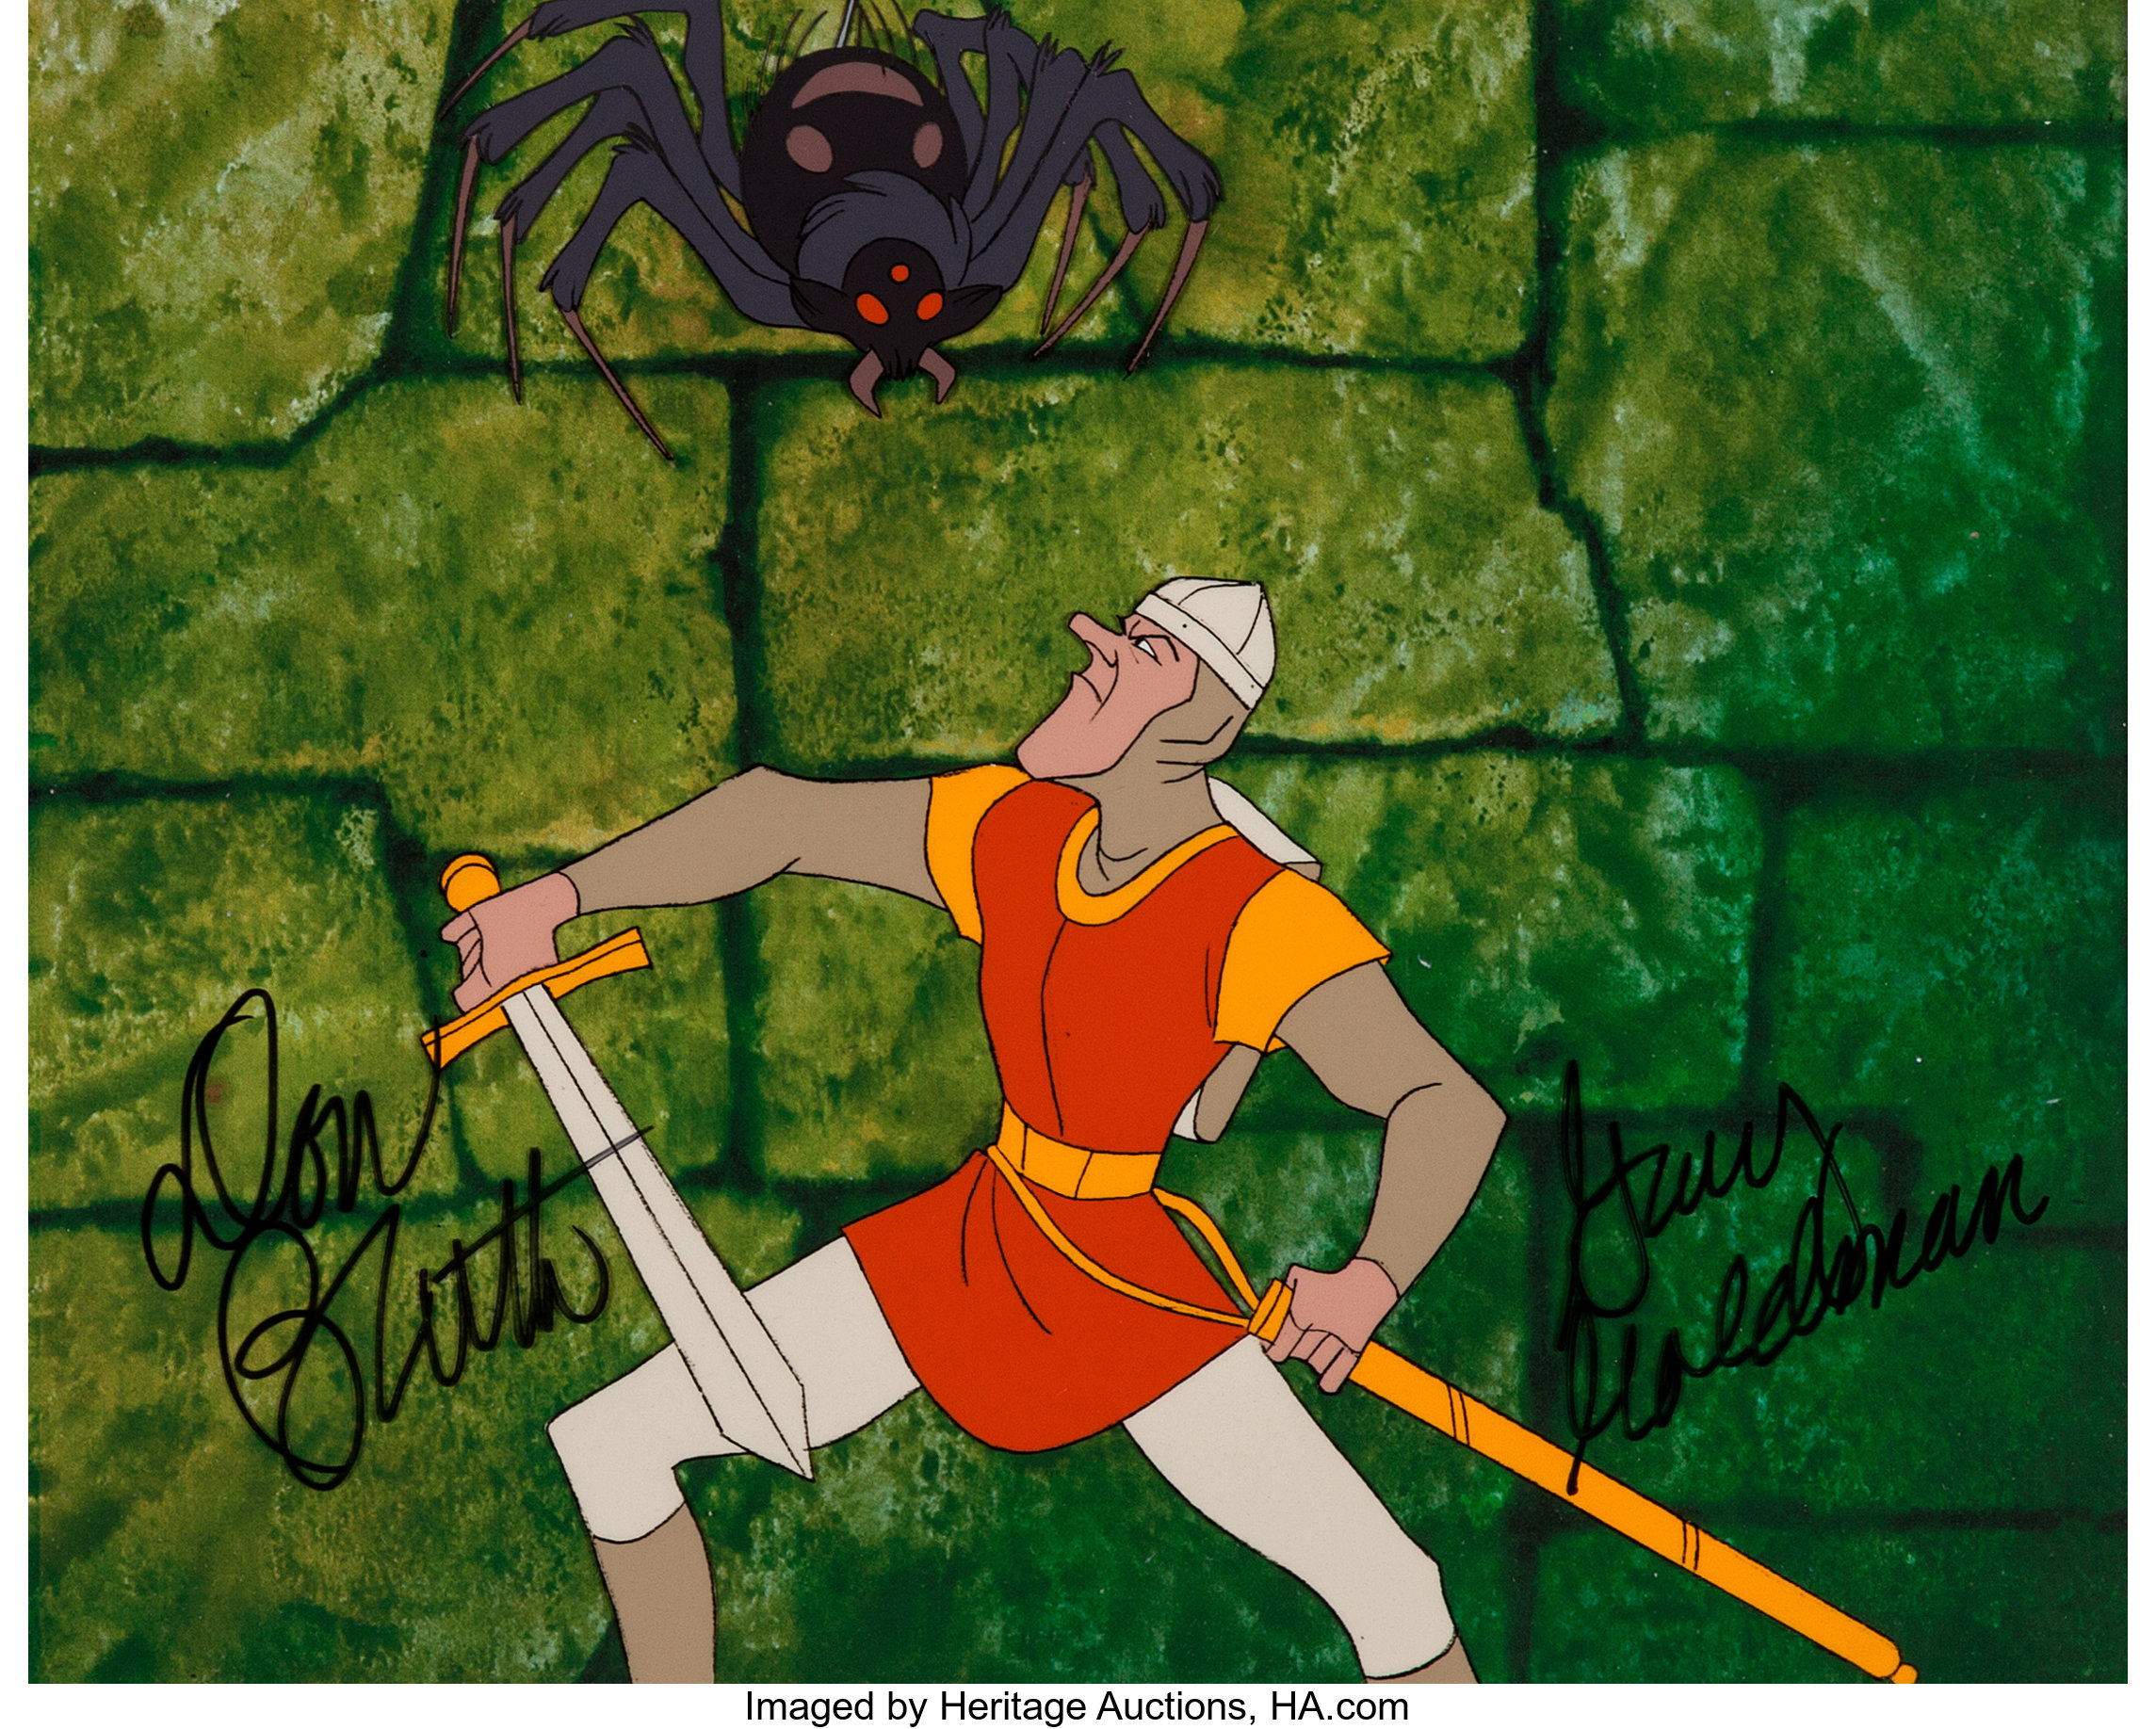 Dragon S Lair Dirk Production Cel Signed By Don Bluth And Gary Lot Heritage Auctions